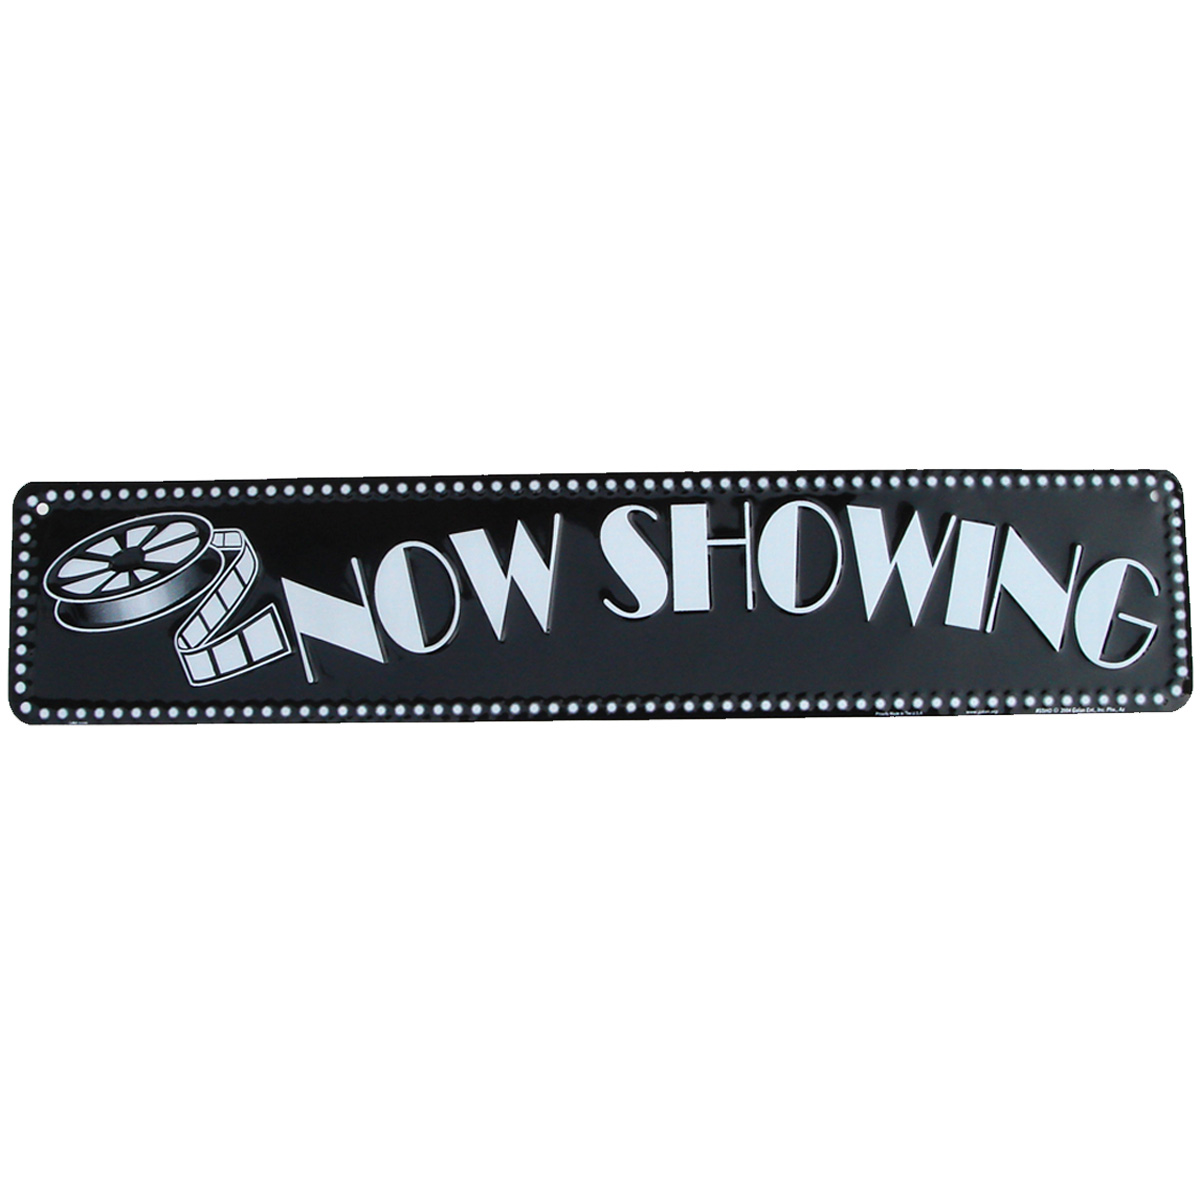 Now Showing   Movie Home Theater Tin Sign Or Wall Plaque Banner